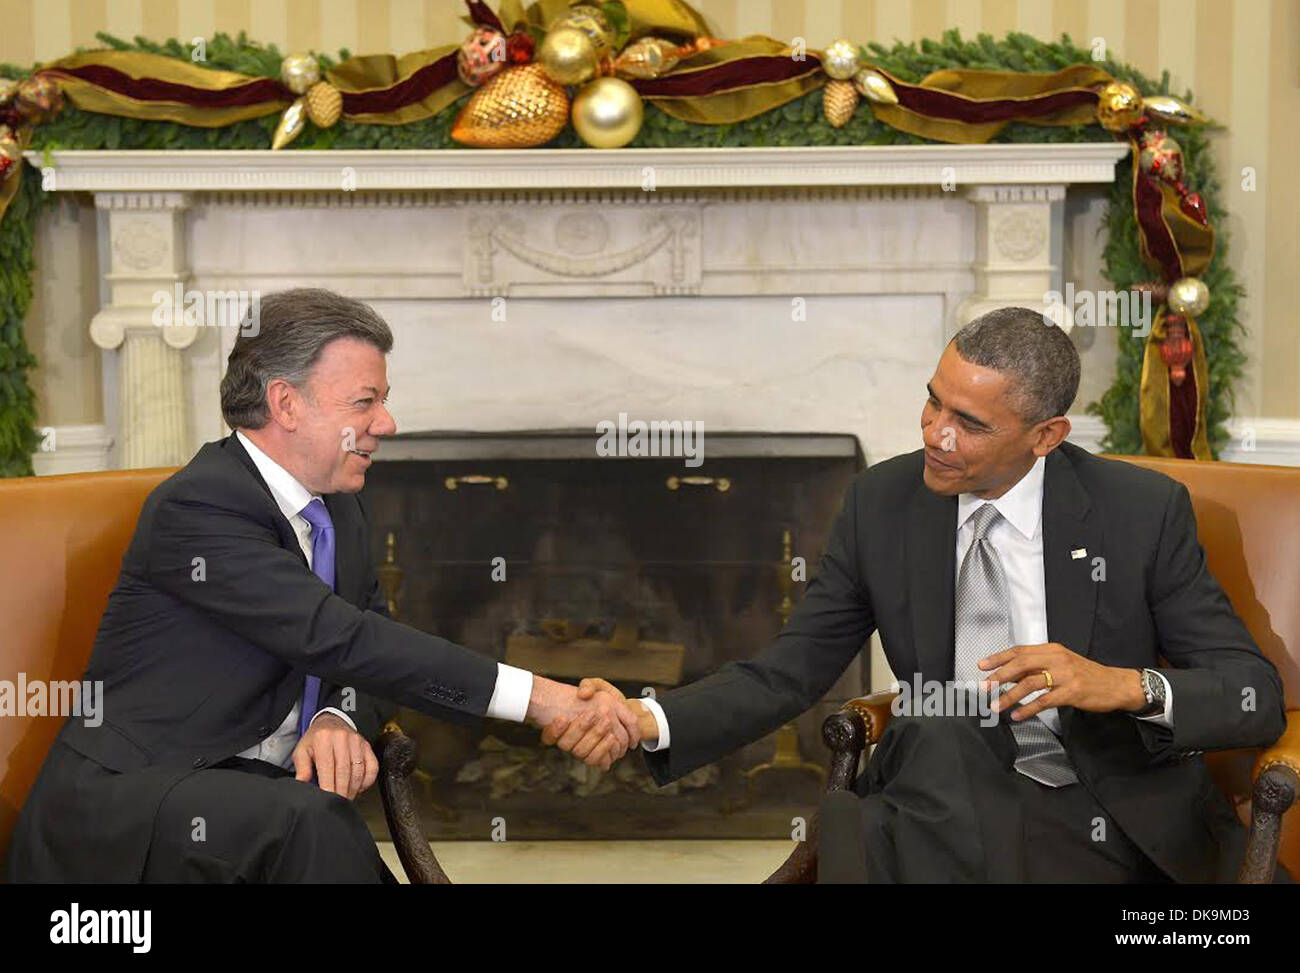 Washington DC, USA. 3rd Dec, 2013. Photo provided by Colombian Presidency shows Colombian President Juan Manuel Santos (L) meeting with U.S. President Barack Obama in Washington, capital of the United States, Dec. 3, 2013. Credit:  Colombia's Presidency/Xinhua/Alamy Live News Stock Photo